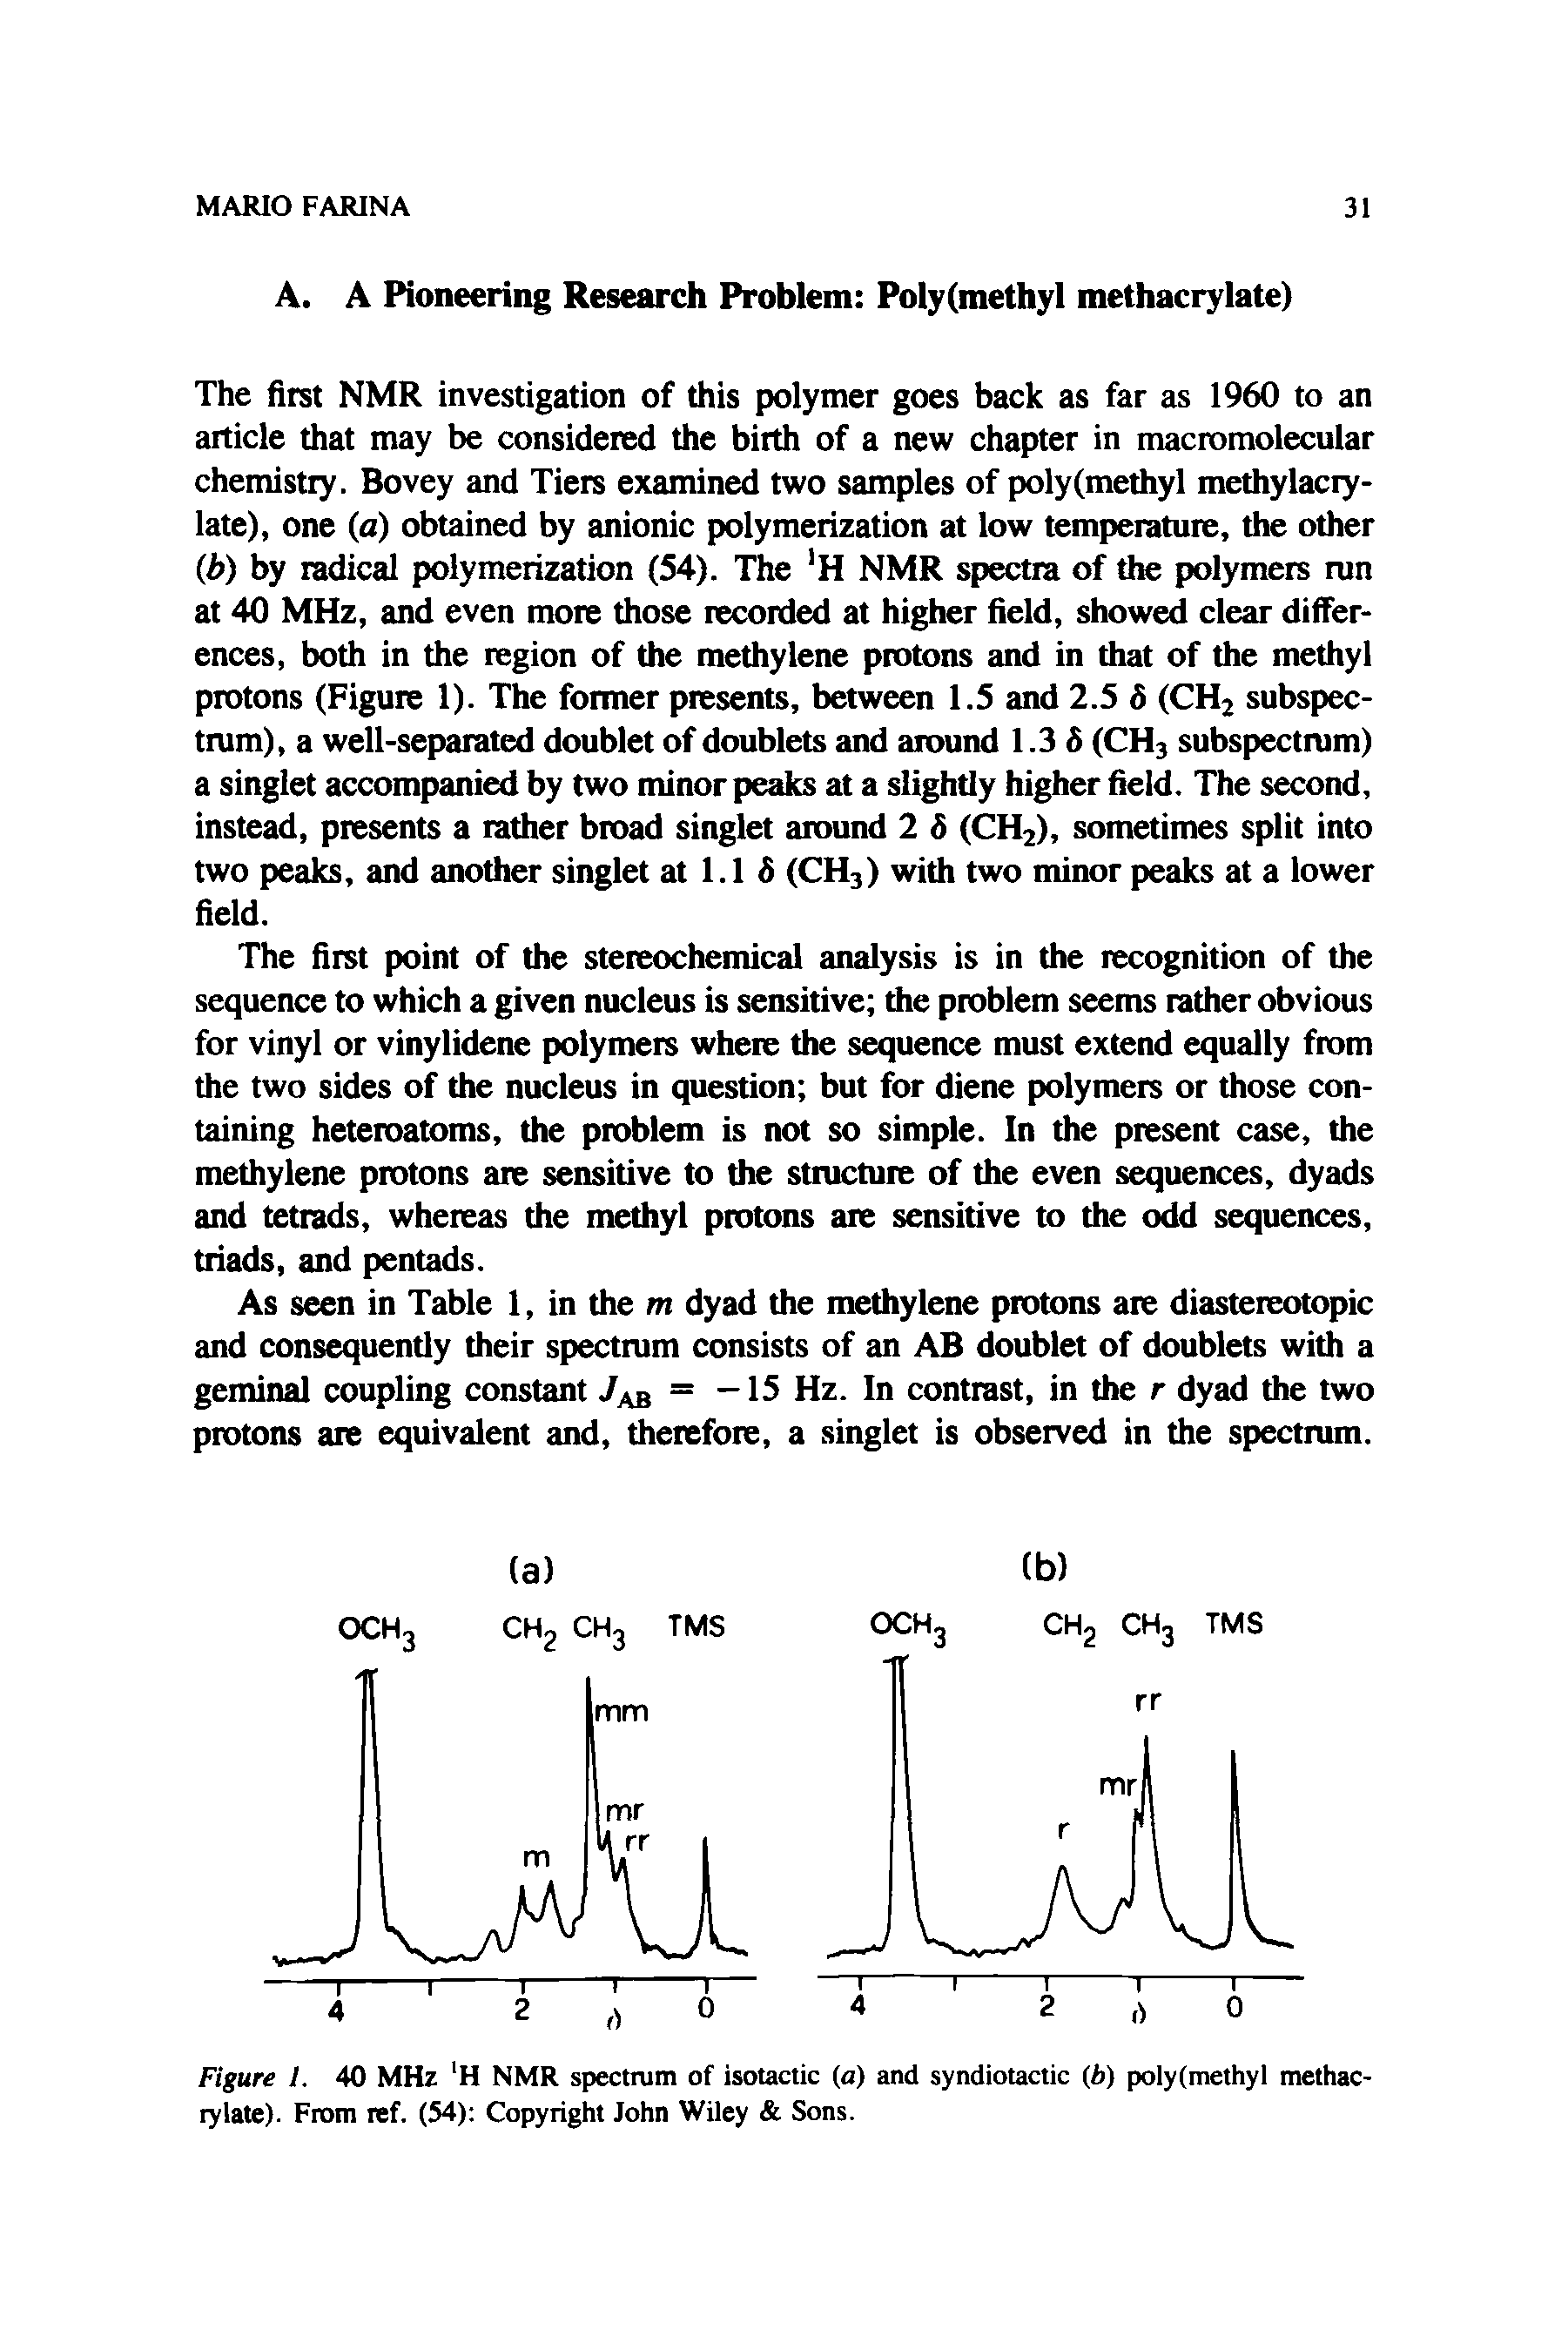 Figure 1. 40 MHz H NMR spectrum of isotactic (a) and syndiotactic (b) poly(methyl methacrylate). From ref. (54) Copyright John Wiley Sons.